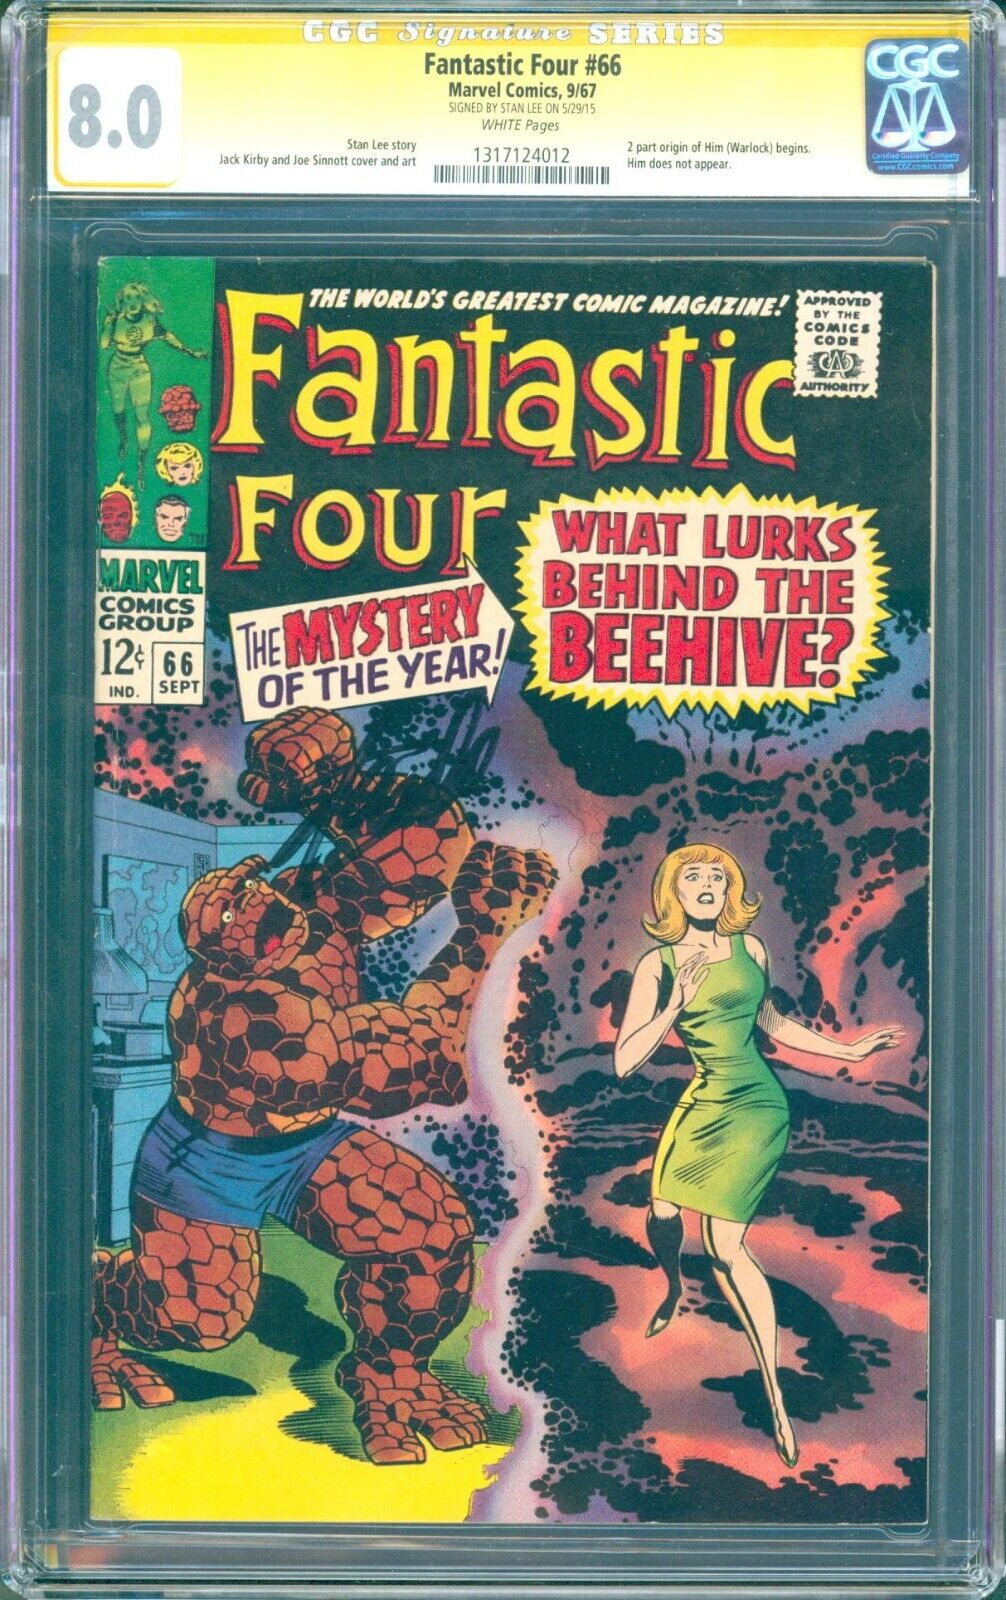 Fantastic Four 66 1967 CGC 80  White pages Signed by Stan Lee SS  Kirby